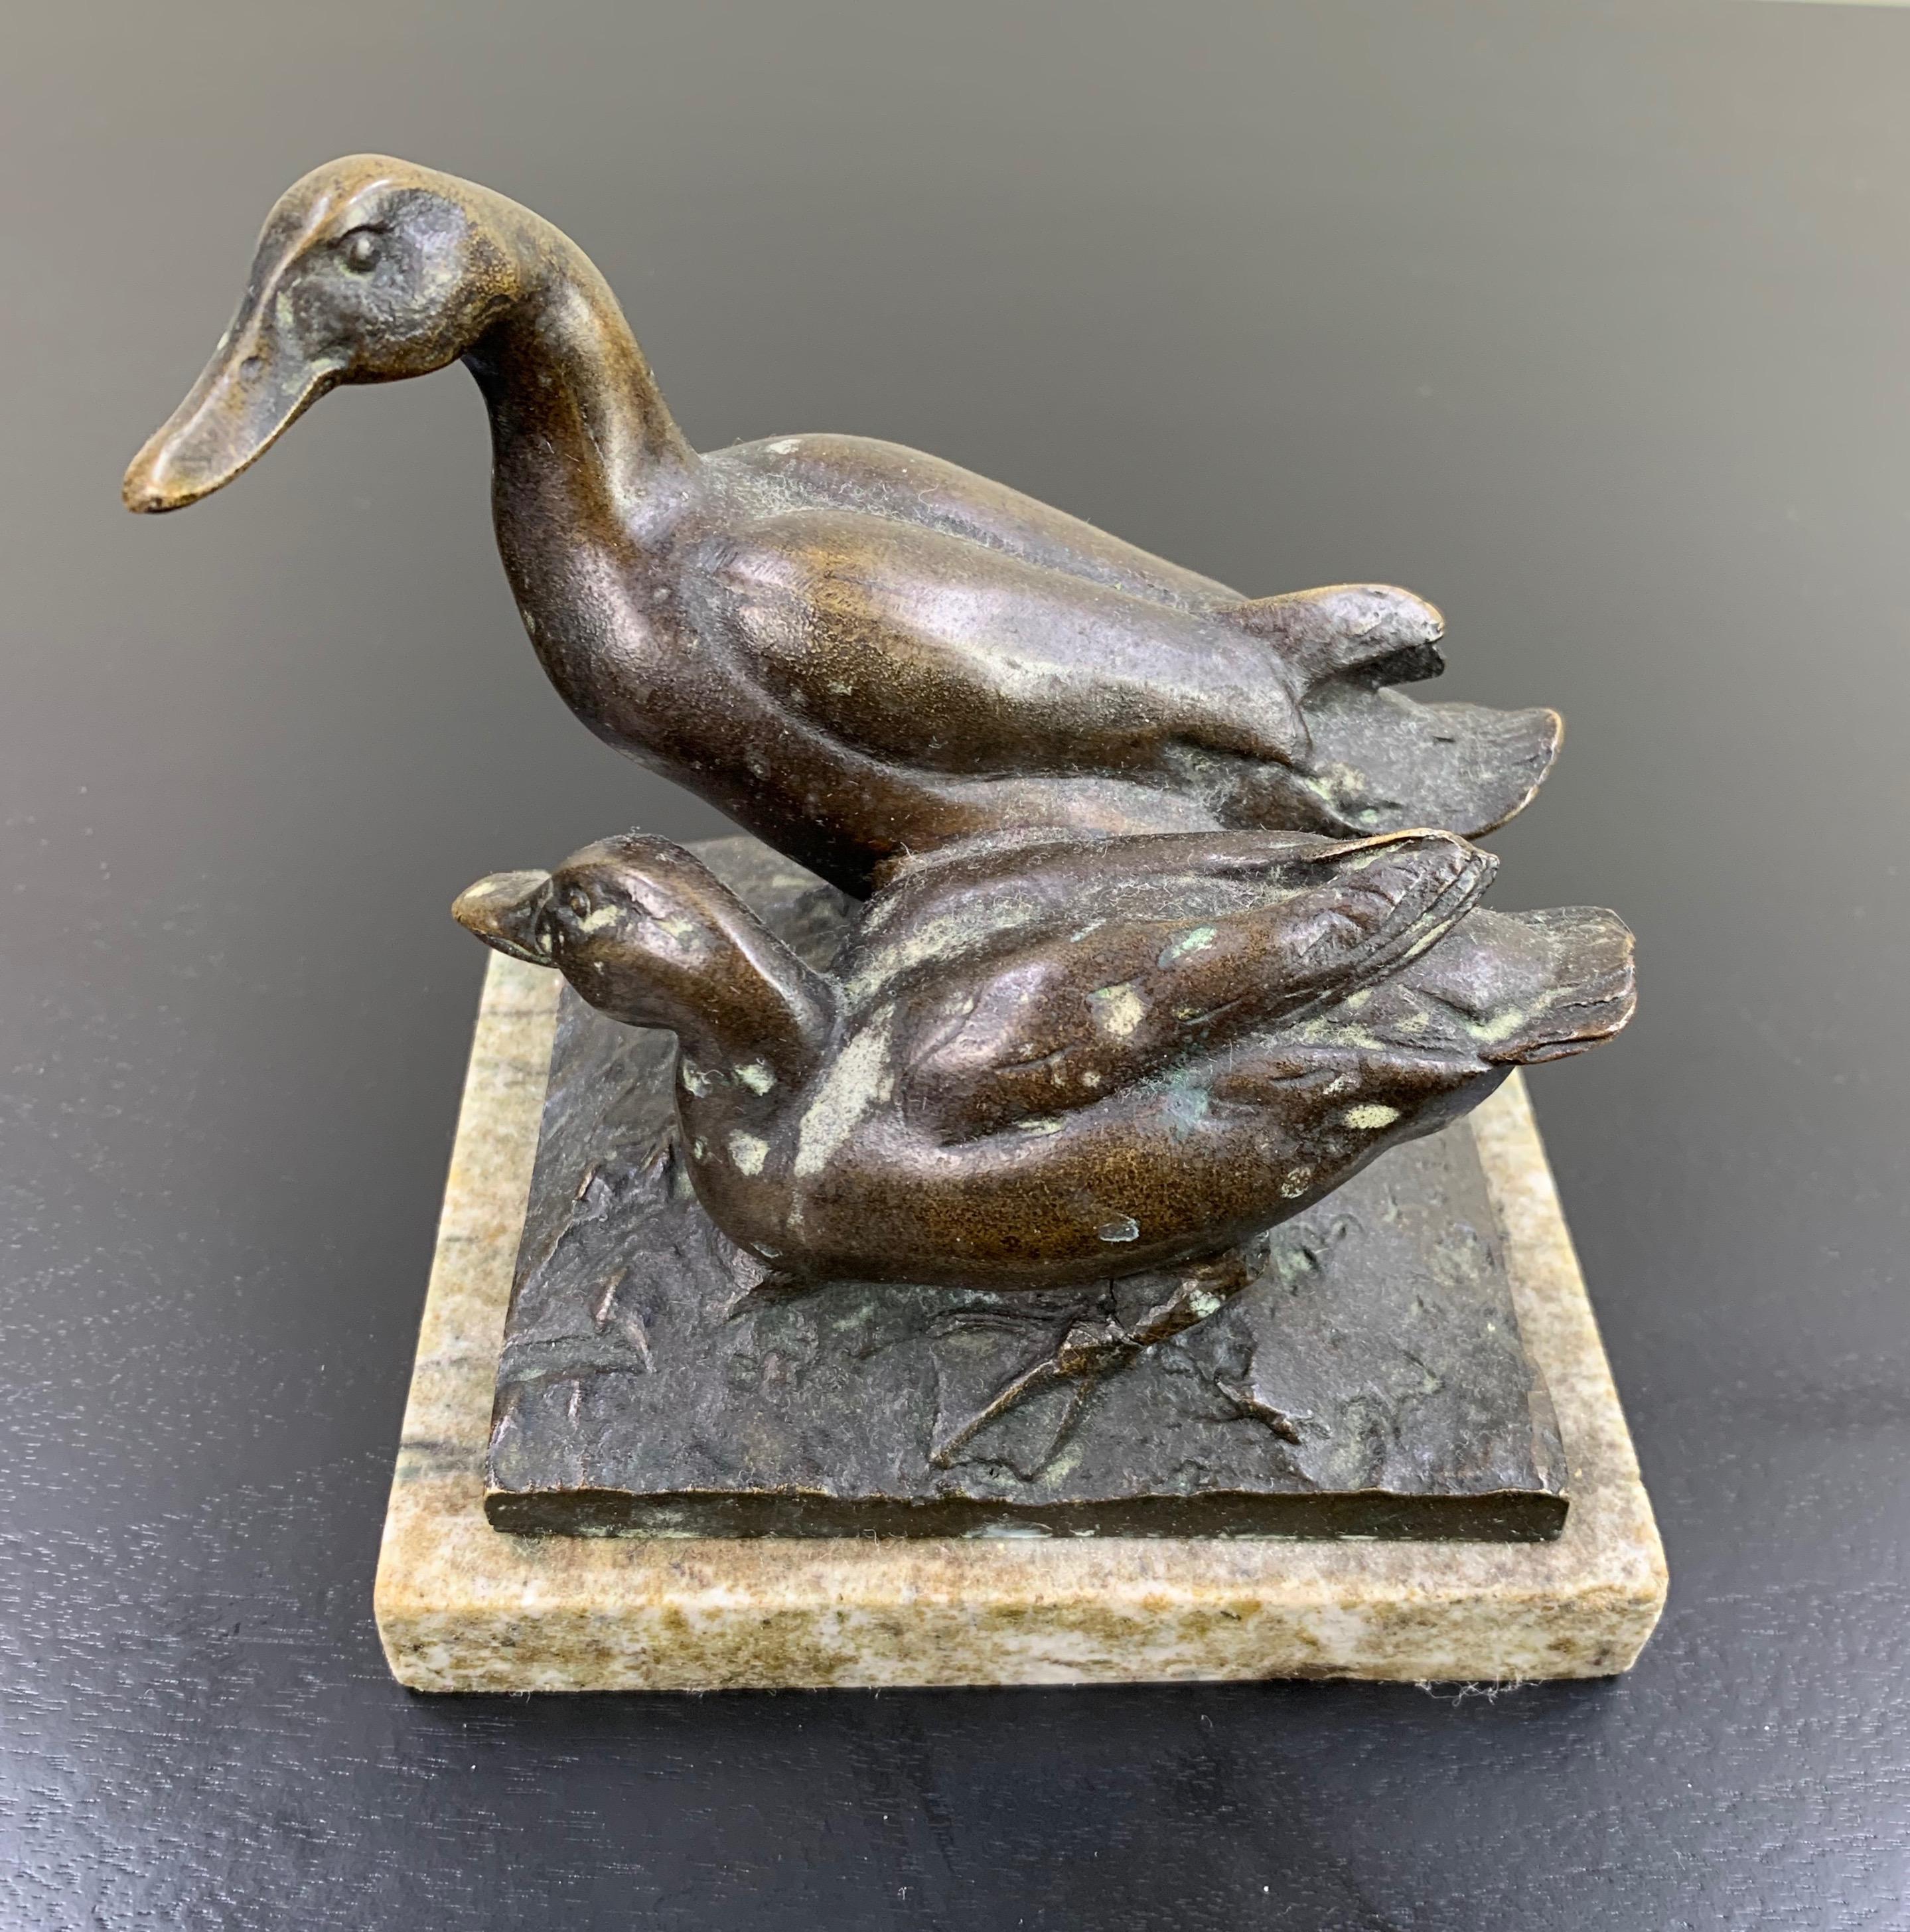 Whimsical grouping of a mother duck and a duckling in a mellow brown patina and a marble plinth. Signed Ludwig Vordermeyer.

In 1888-1890, Vordermayer attended the educational institute of the Museum of Applied Arts in Berlin. 1890-1891 he was a